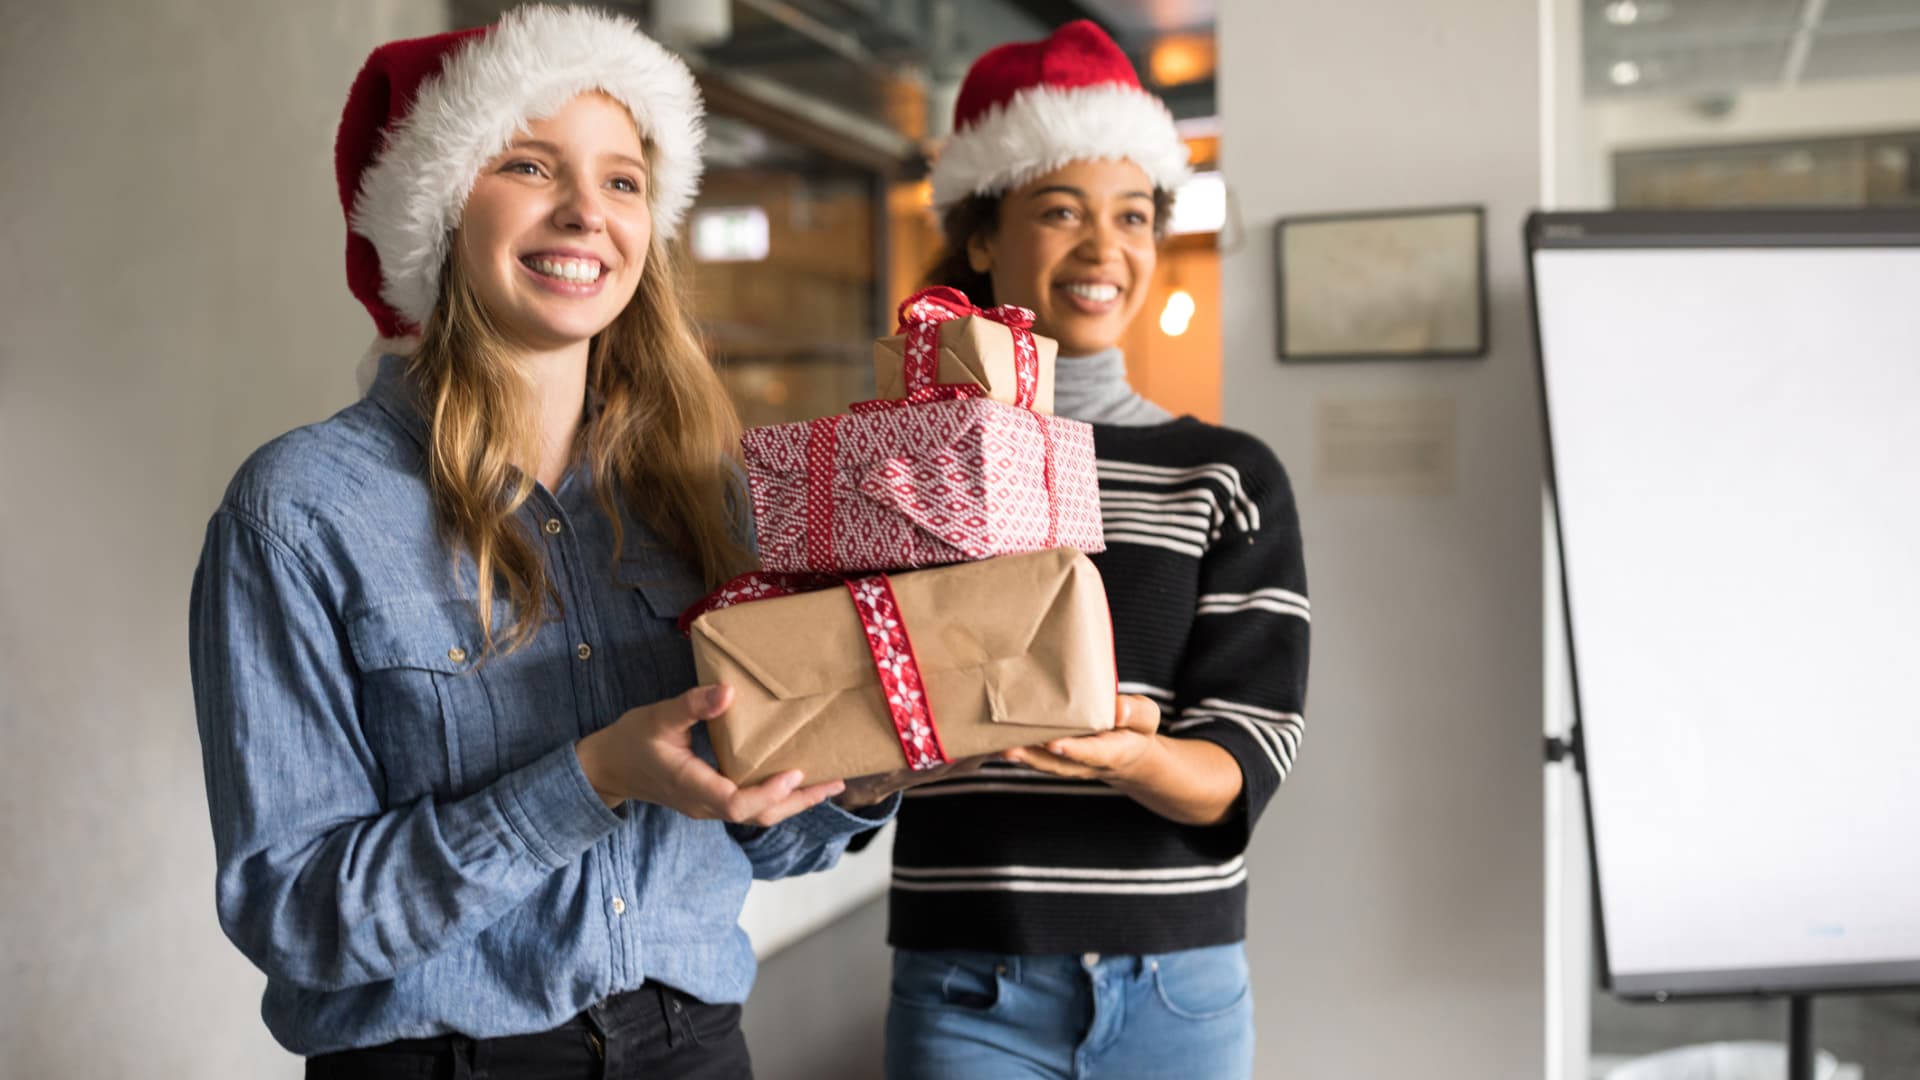 Should you buy a gift for your boss and co-workers for the holidays?